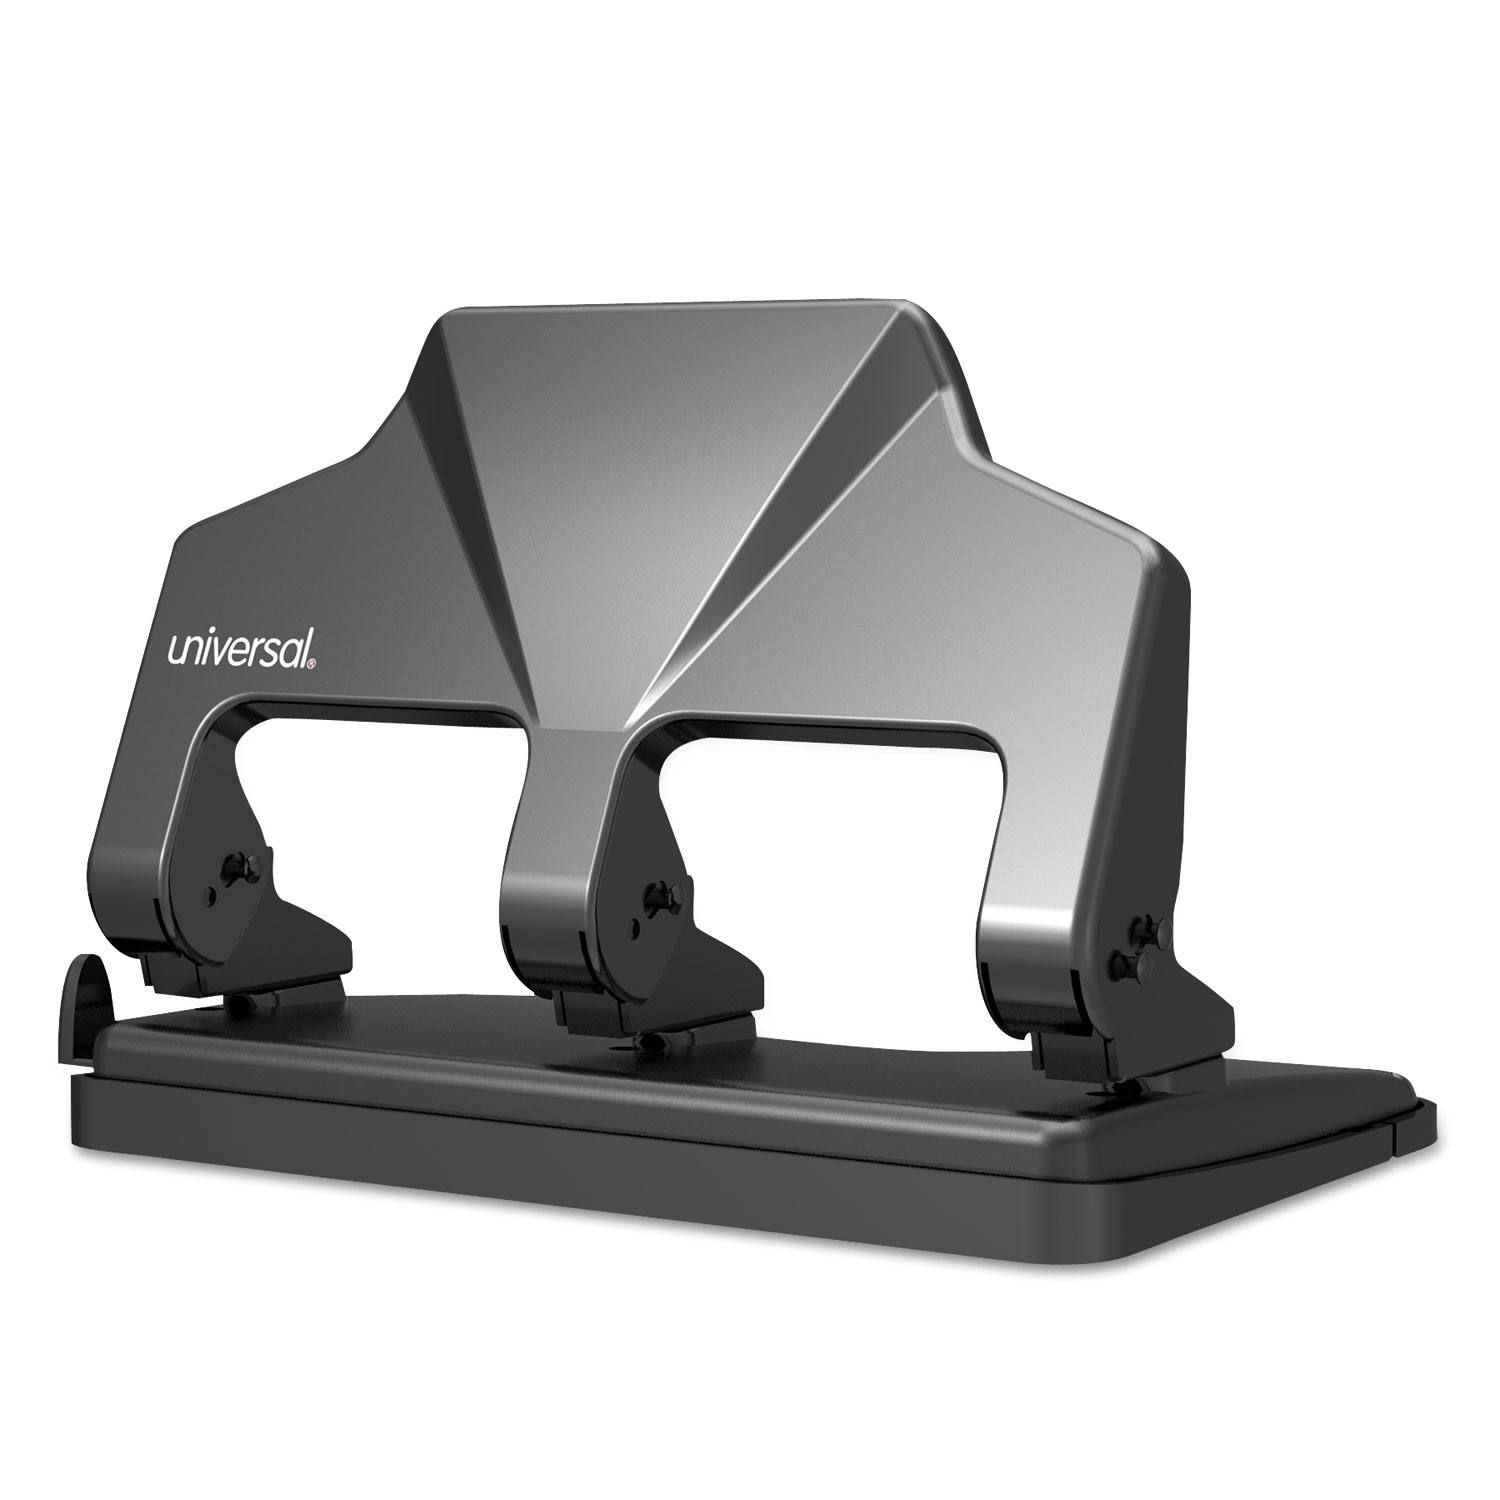 Heavy Duty Adjustable 3-Hole Punch - Up to 30 Sheets!